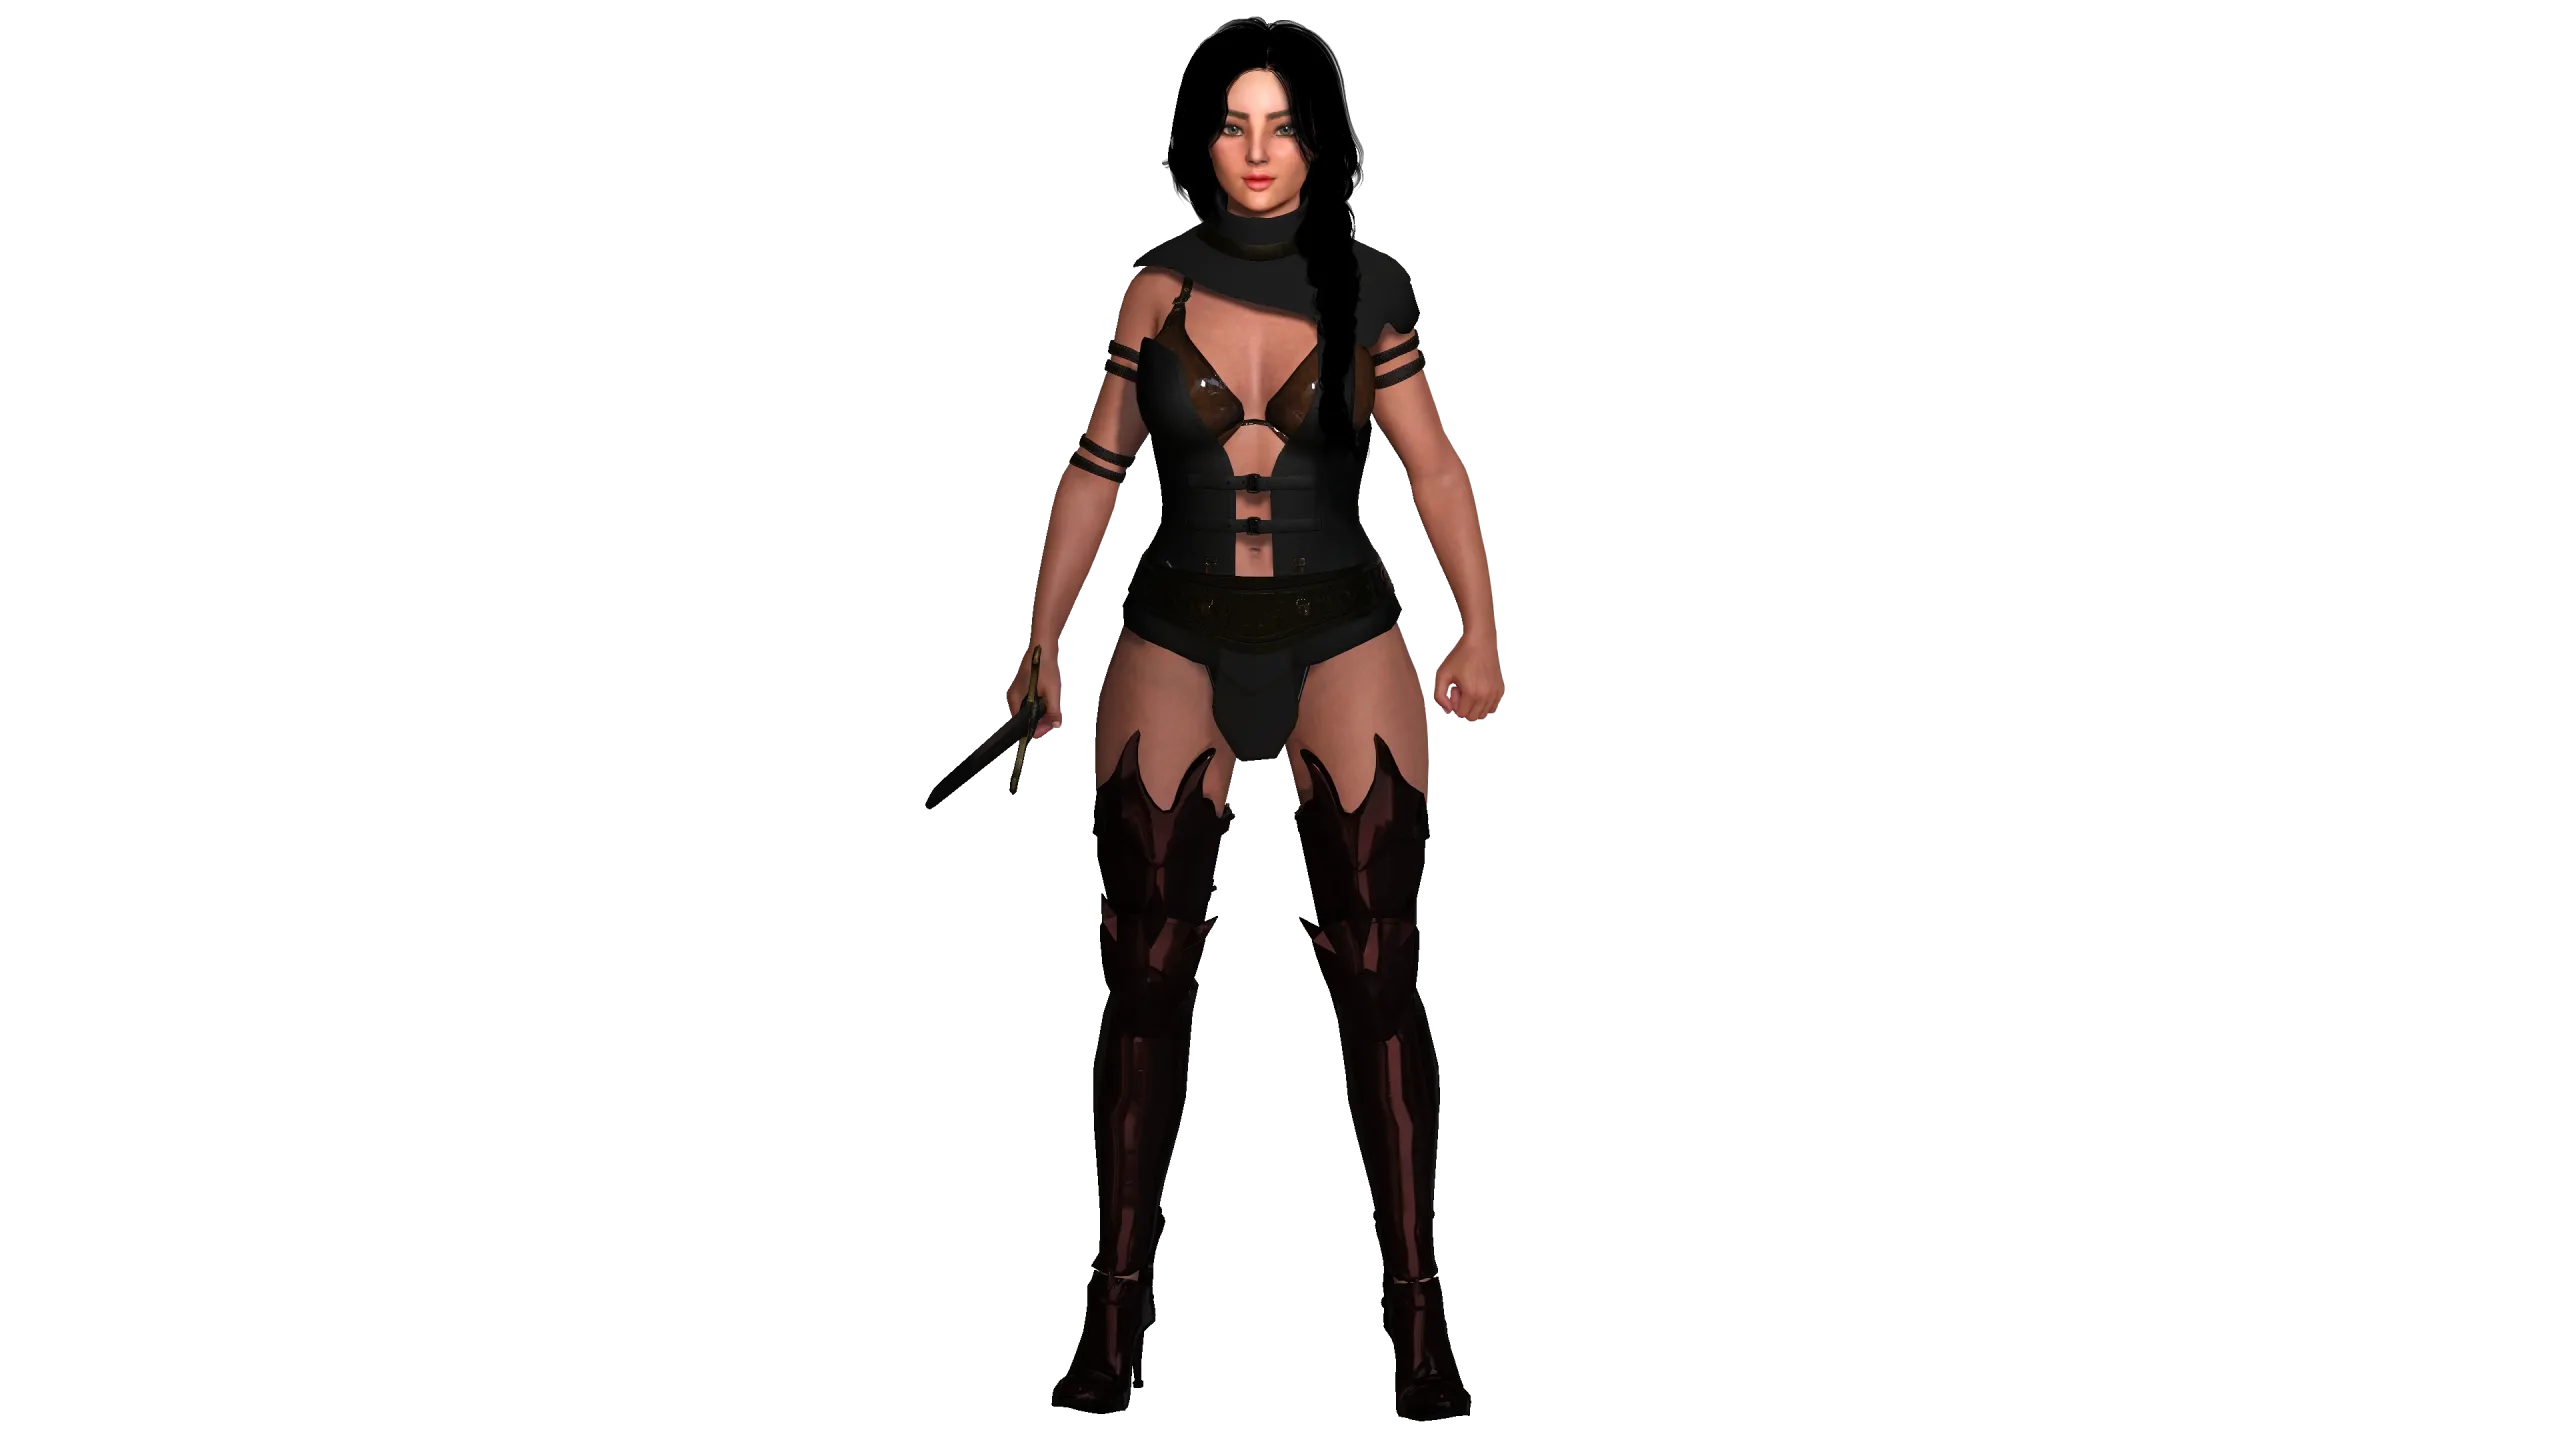 AAA 3D FANTASY FEMALE WARRIOR - REALISTIC RIG GAME CHARACTER